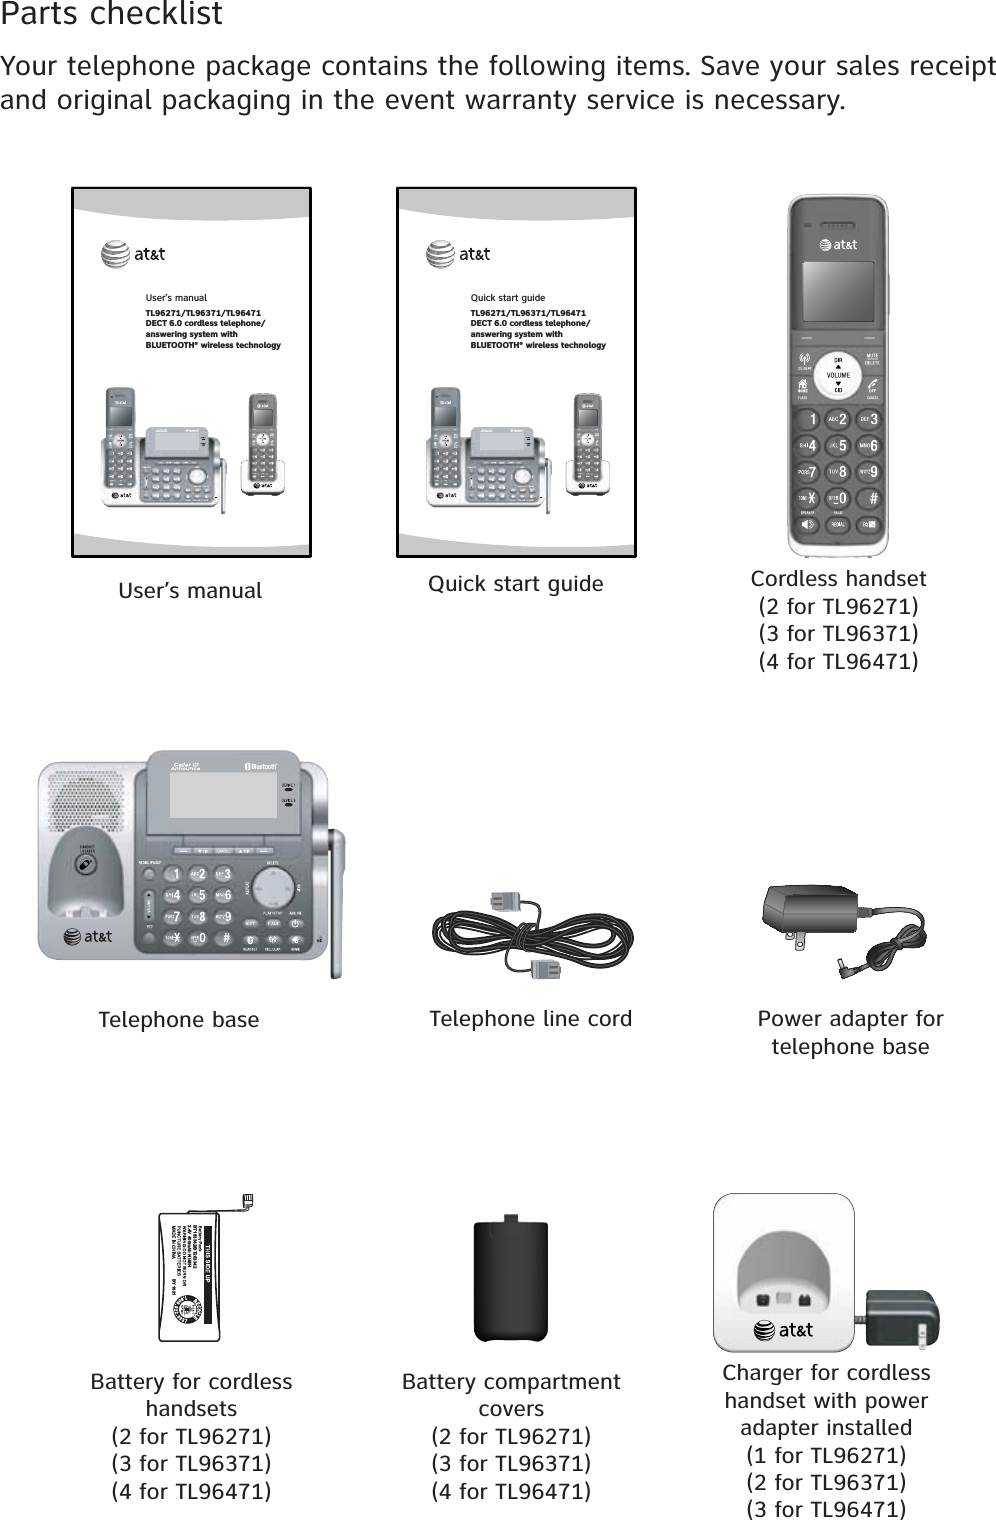 Parts checklistYour telephone package contains the following items. Save your sales receipt and original packaging in the event warranty service is necessary.Telephone line cord Power adapter for telephone baseCordless handset(2 for TL96271)(3 for TL96371)(4 for TL96471)Telephone baseCharger for cordless handset with power adapter installed (1 for TL96271)(2 for TL96371)(3 for TL96471)Battery for cordless handsets(2 for TL96271)(3 for TL96371)(4 for TL96471)Battery compartment covers(2 for TL96271)(3 for TL96371)(4 for TL96471)User’s manual Quick start guideUser’s manualTL96271/TL96371/TL96471DECT 6.0 cordless telephone/answering system with BLUETOOTH® wireless technologyQuick start guideTL96271/TL96371/TL96471DECT 6.0 cordless telephone/answering system with BLUETOOTH® wireless technologyBY 1021 BT183342/BT2833422.4V 400mAh Ni-MH